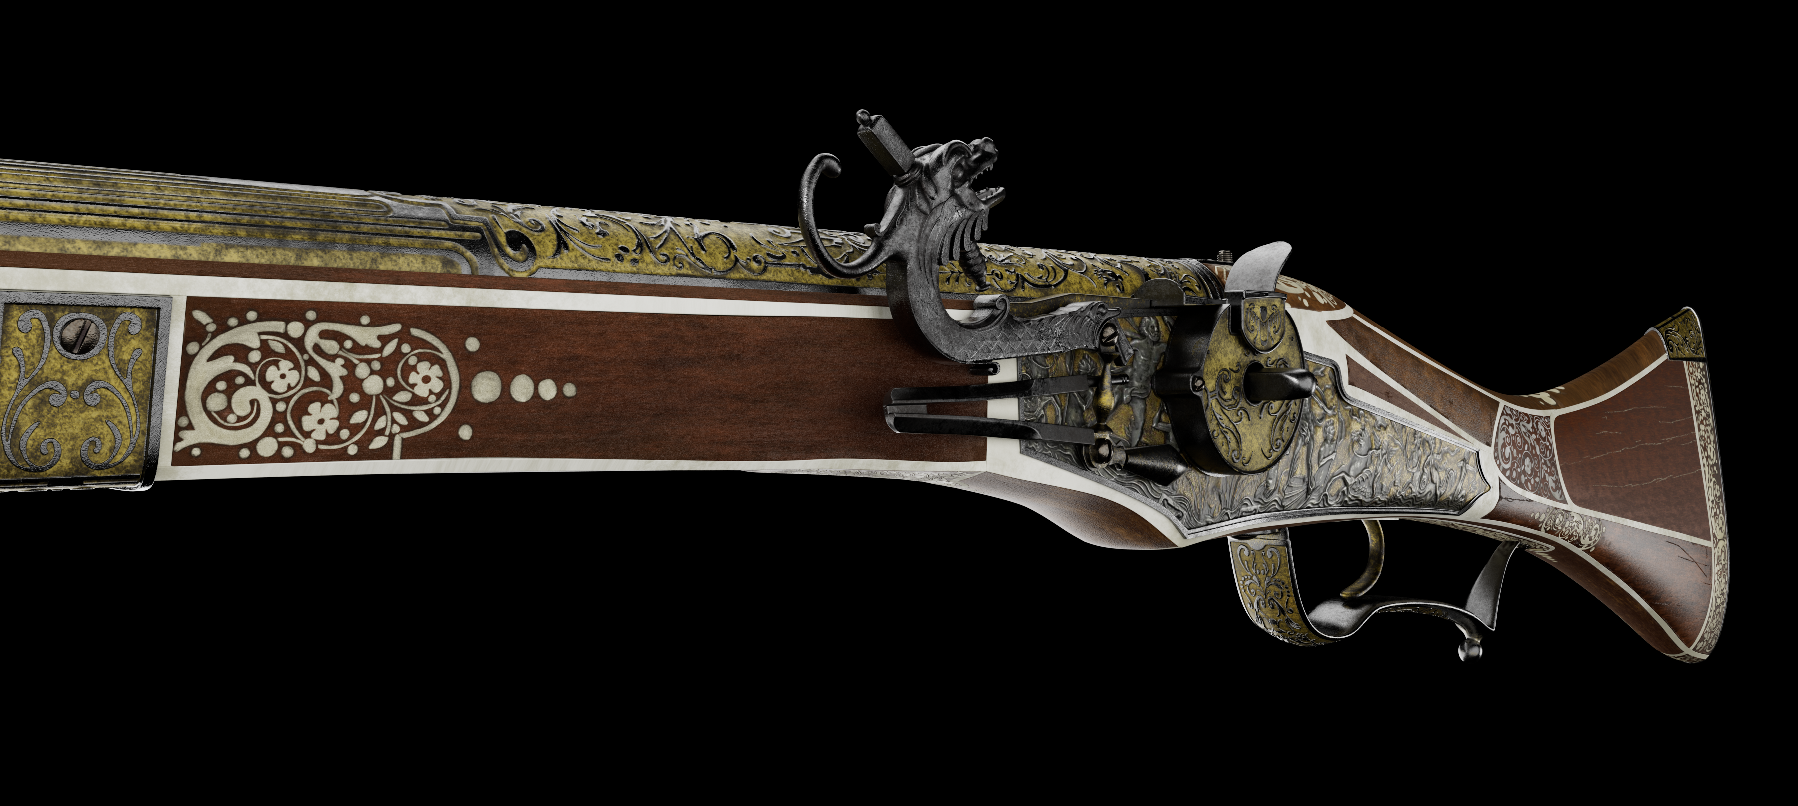 3rd year project modelling an ornate wheel lock rifle, textured by Courtney Power.